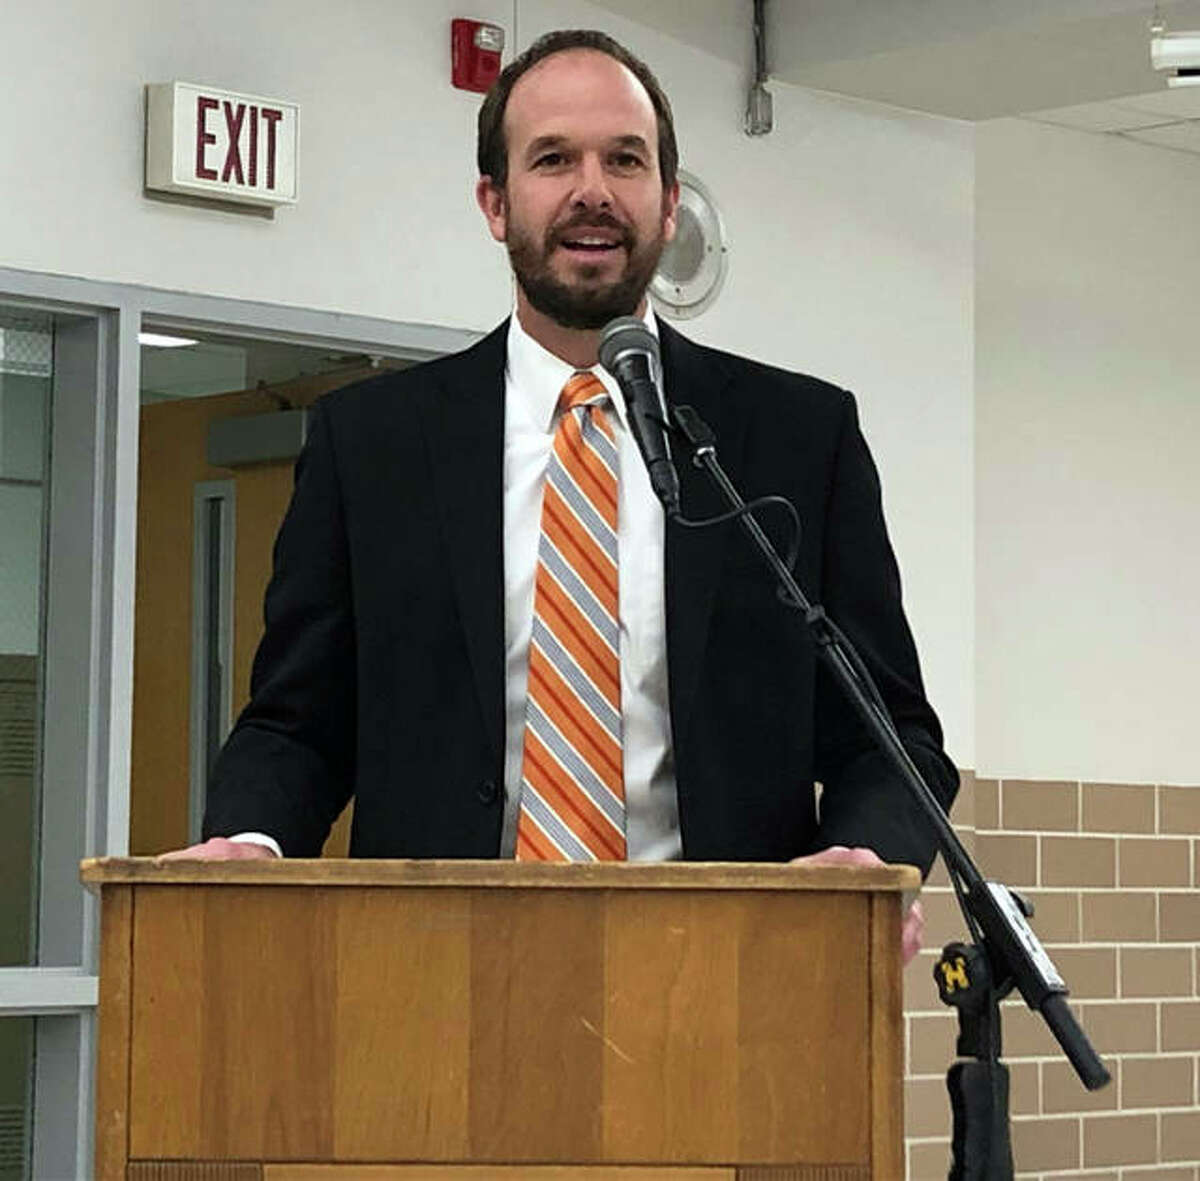 Jason Henderson, pictured, current assistant superintendent of Triad Community Unit School District 2, Thursday at a special meeting was named as the new Edwardsville District 7 Superintendent.